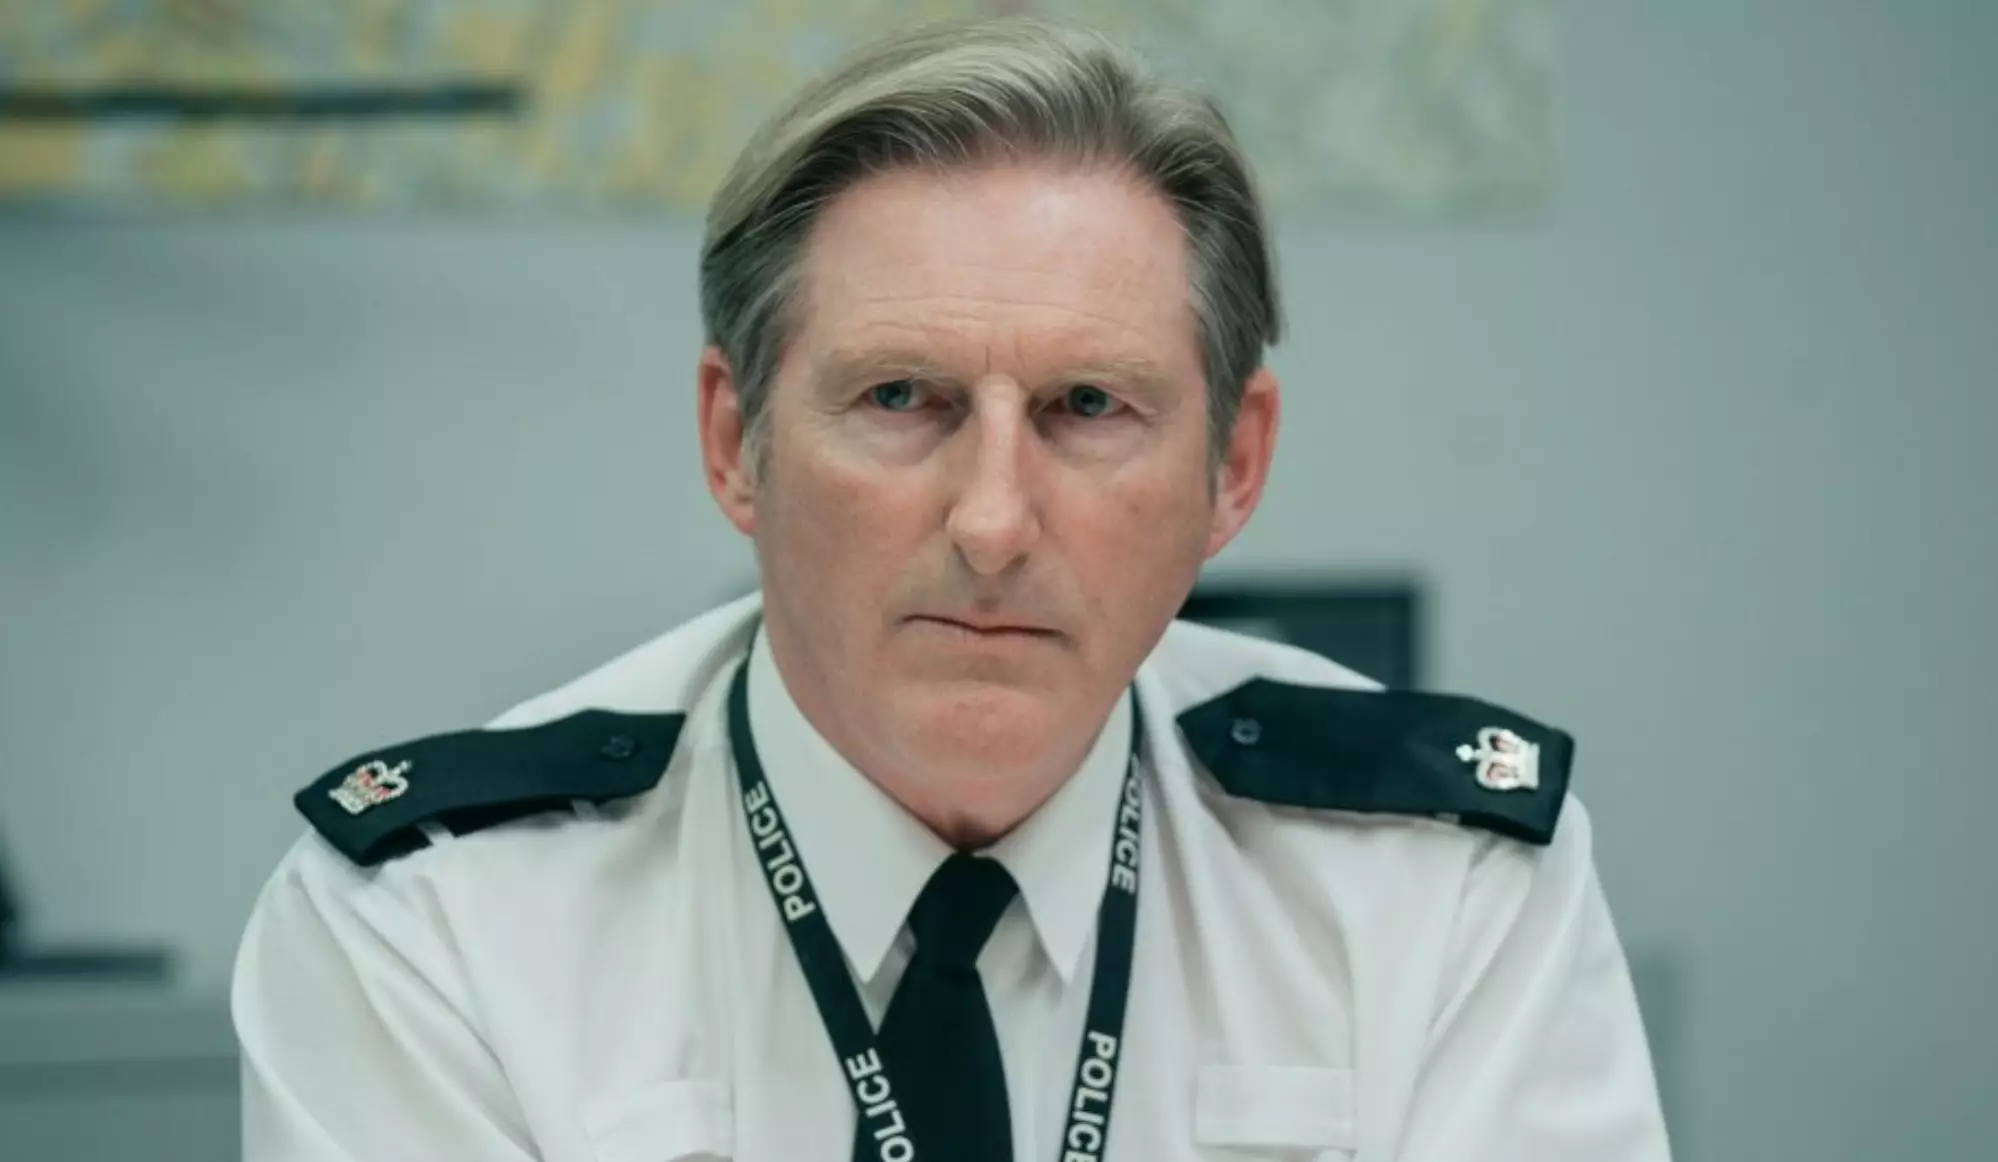 Is Line Of Duty Based On A True Story?